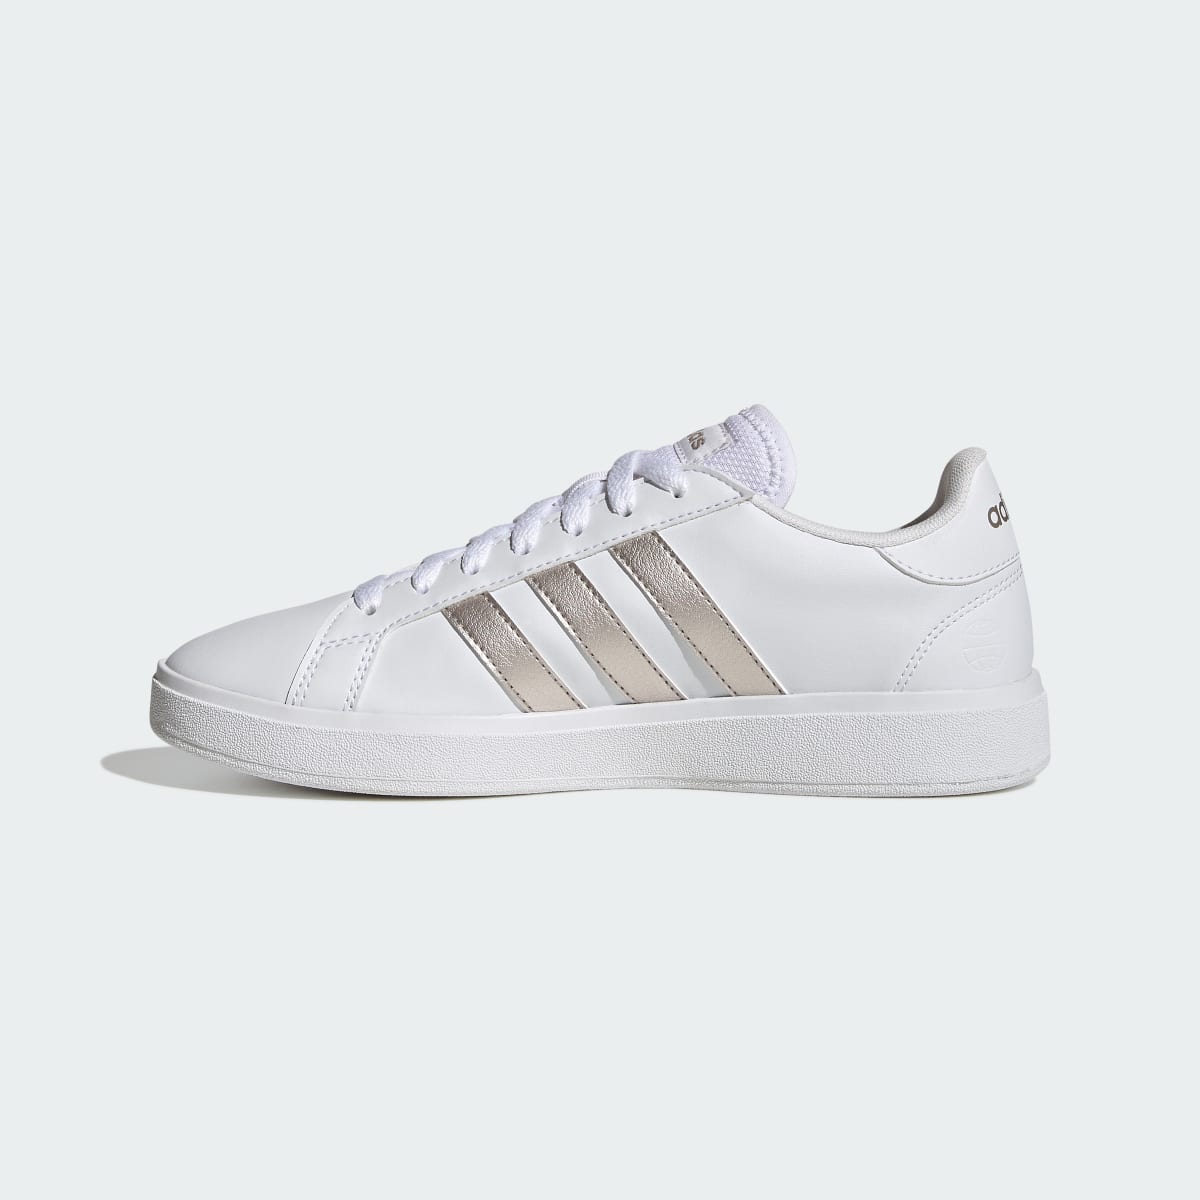 Adidas Tenis adidas Grand Court TD Lifestyle Court Casual. 7